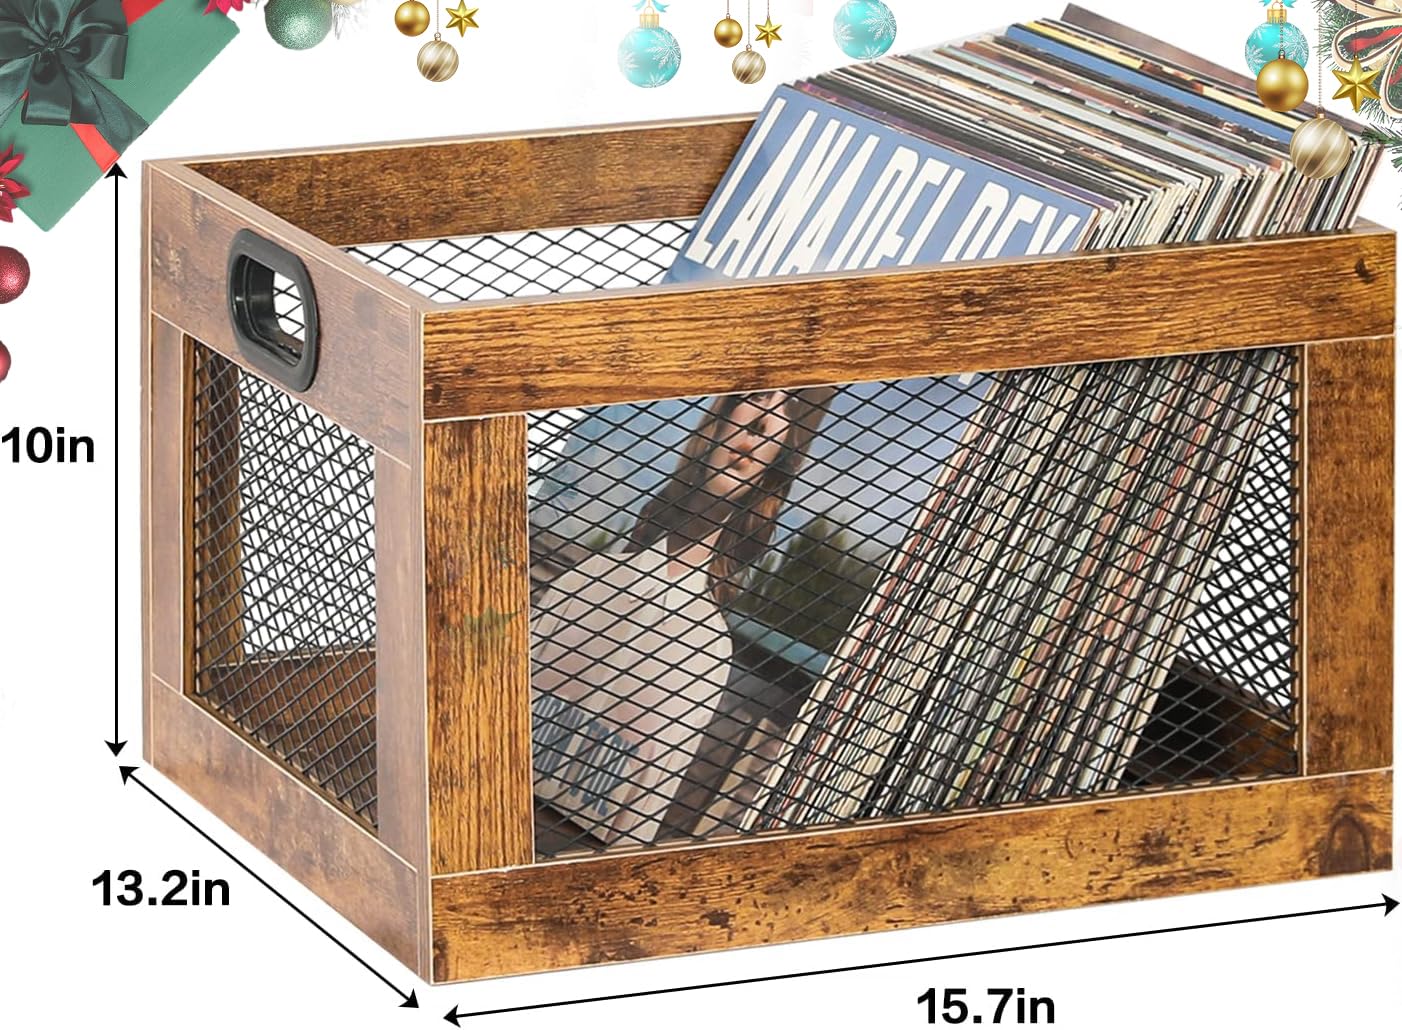 3IngSeagulls Vinyl Record Storage Crate Wooden Record Holder, Classic Cube Record Organizer Storage 100+ Records, Brown Color Vinyl Record Holder for Albums Super Easy to Assemble